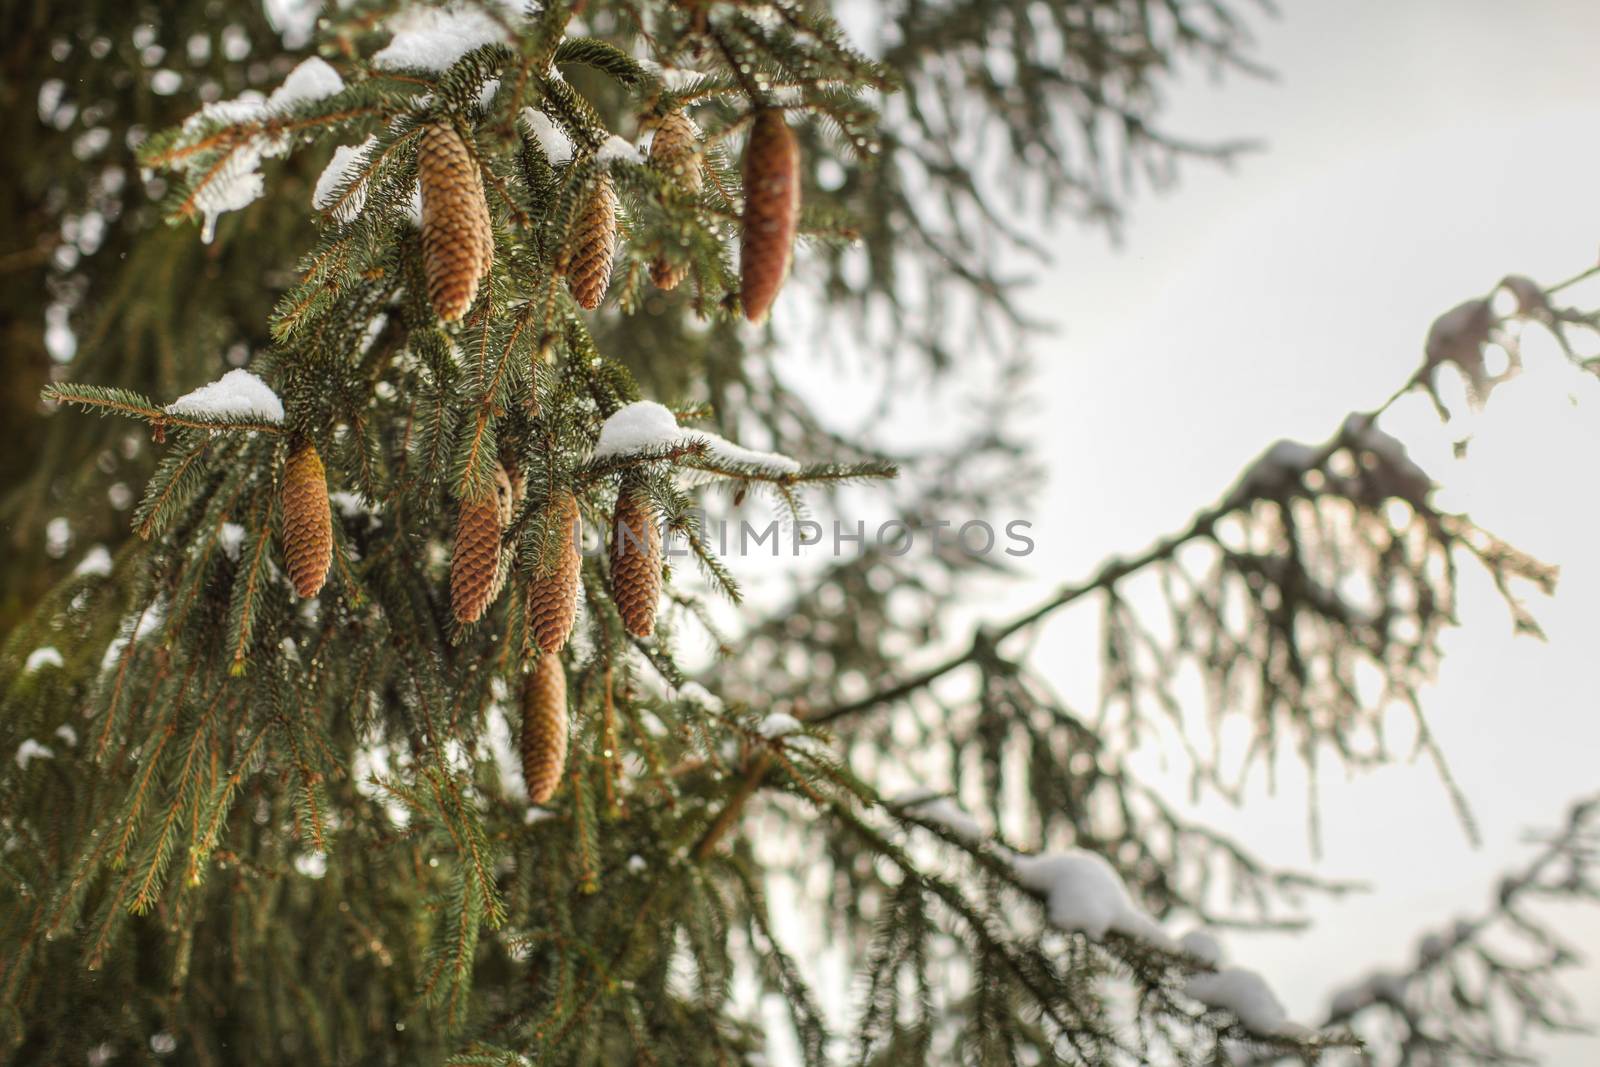 Snow melting on pines branches with coniferous cones